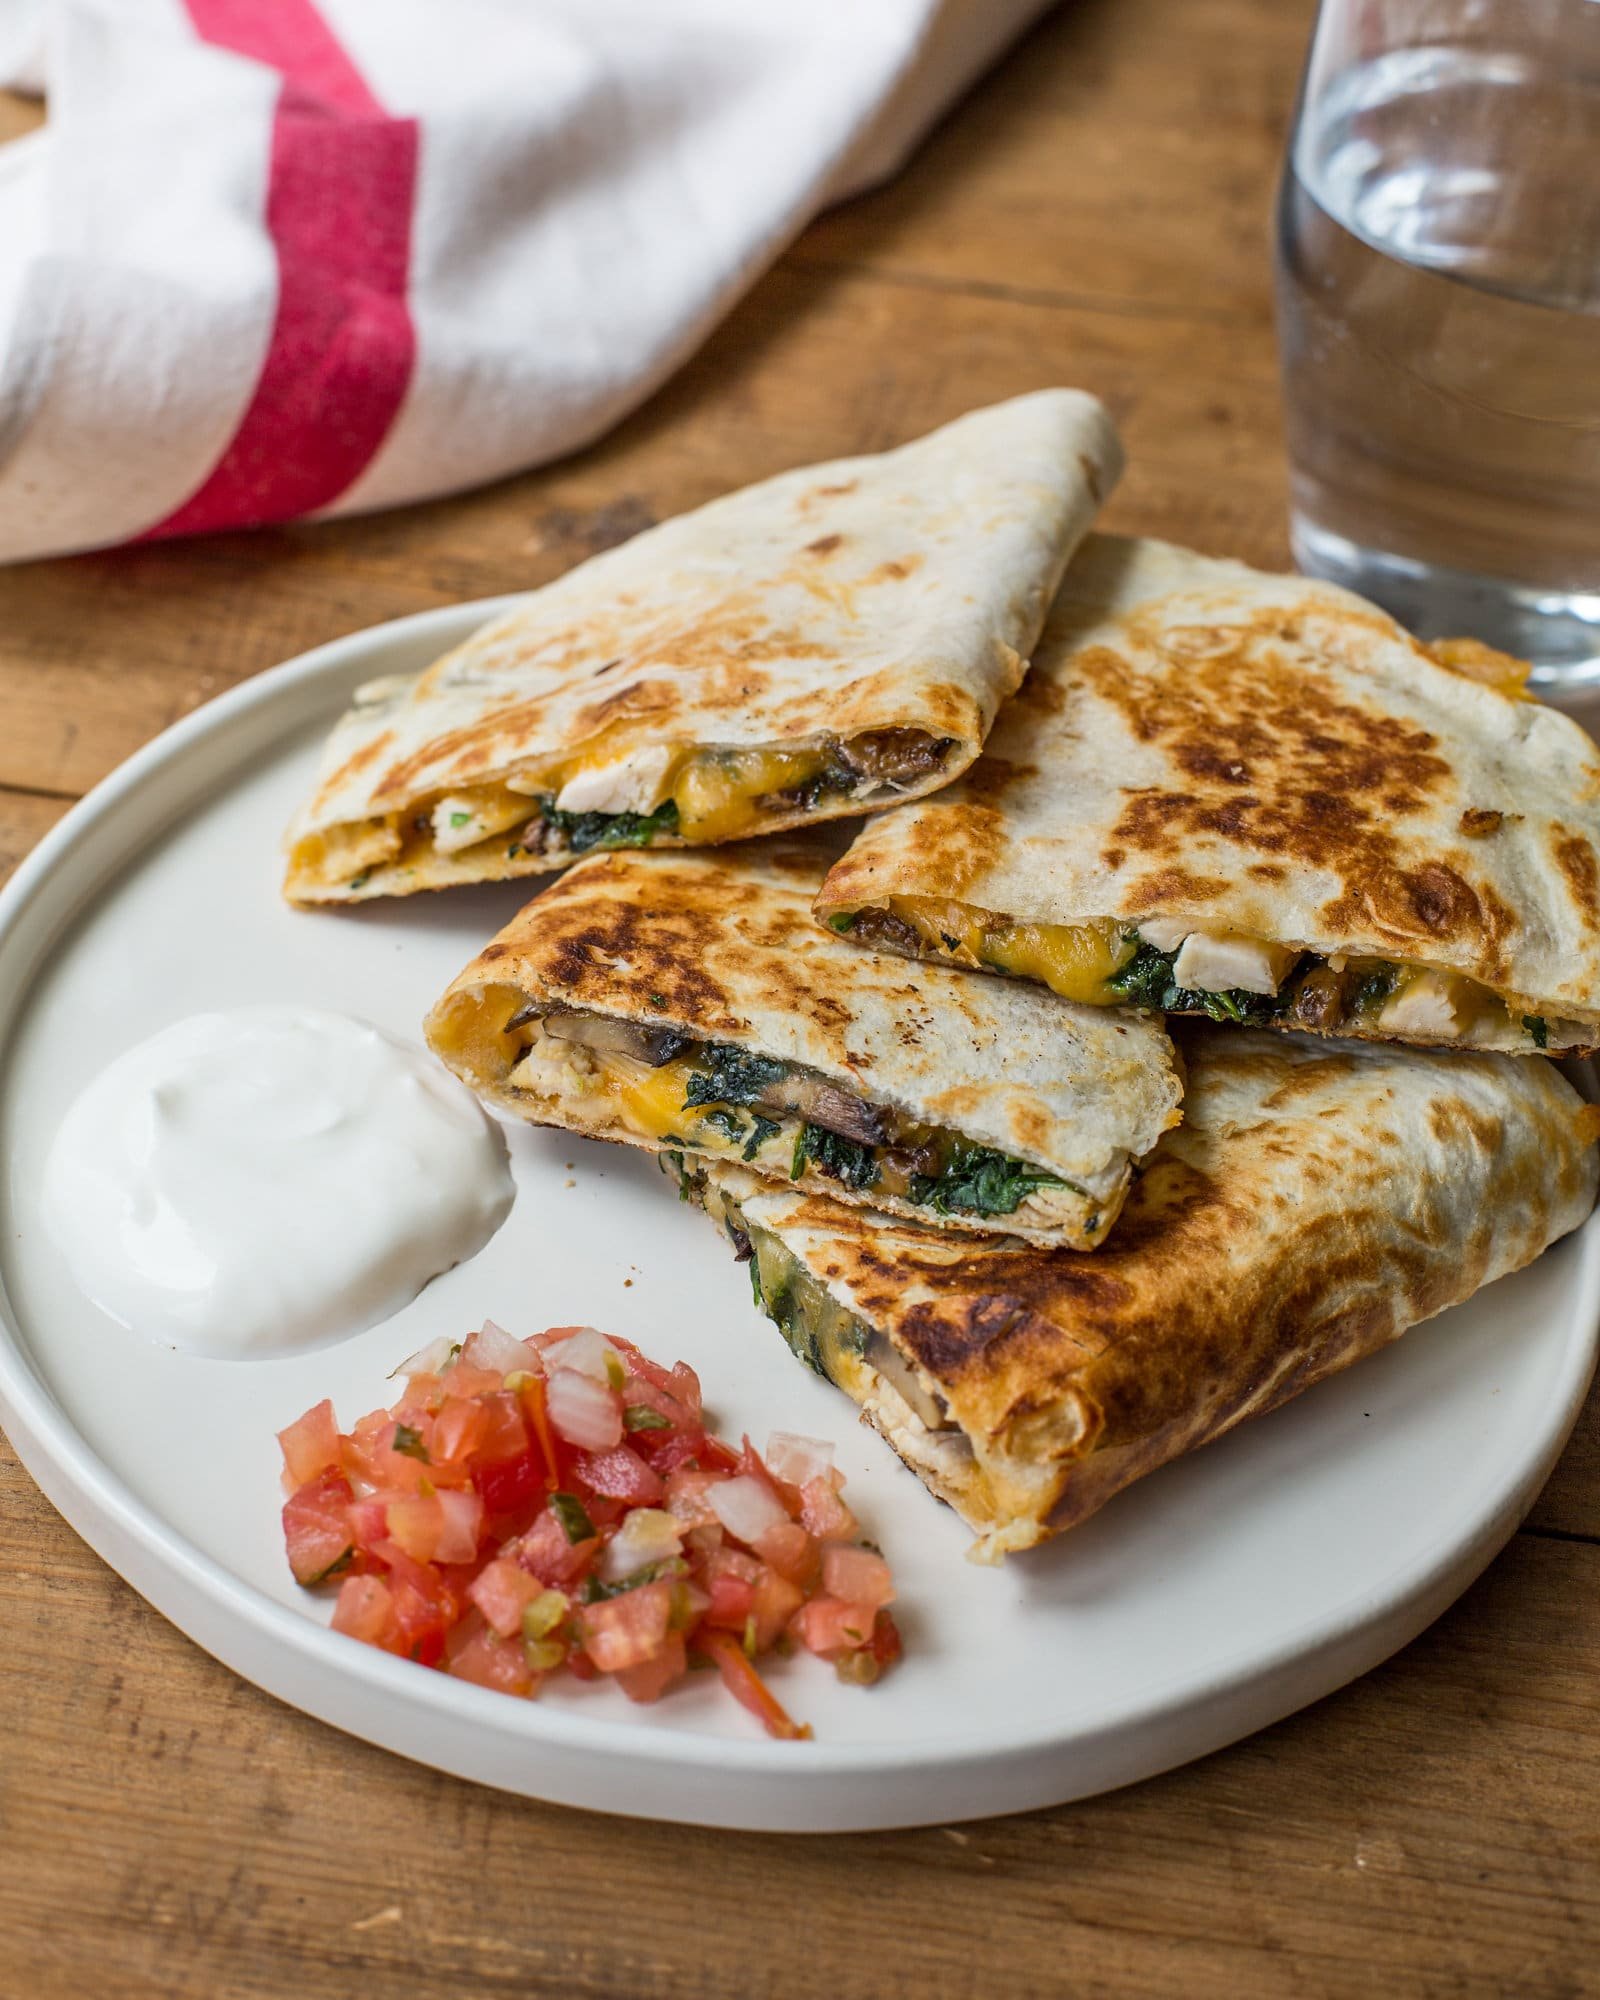 Spinach, Mushroom, and Chicken Quesadillas on a white plate.